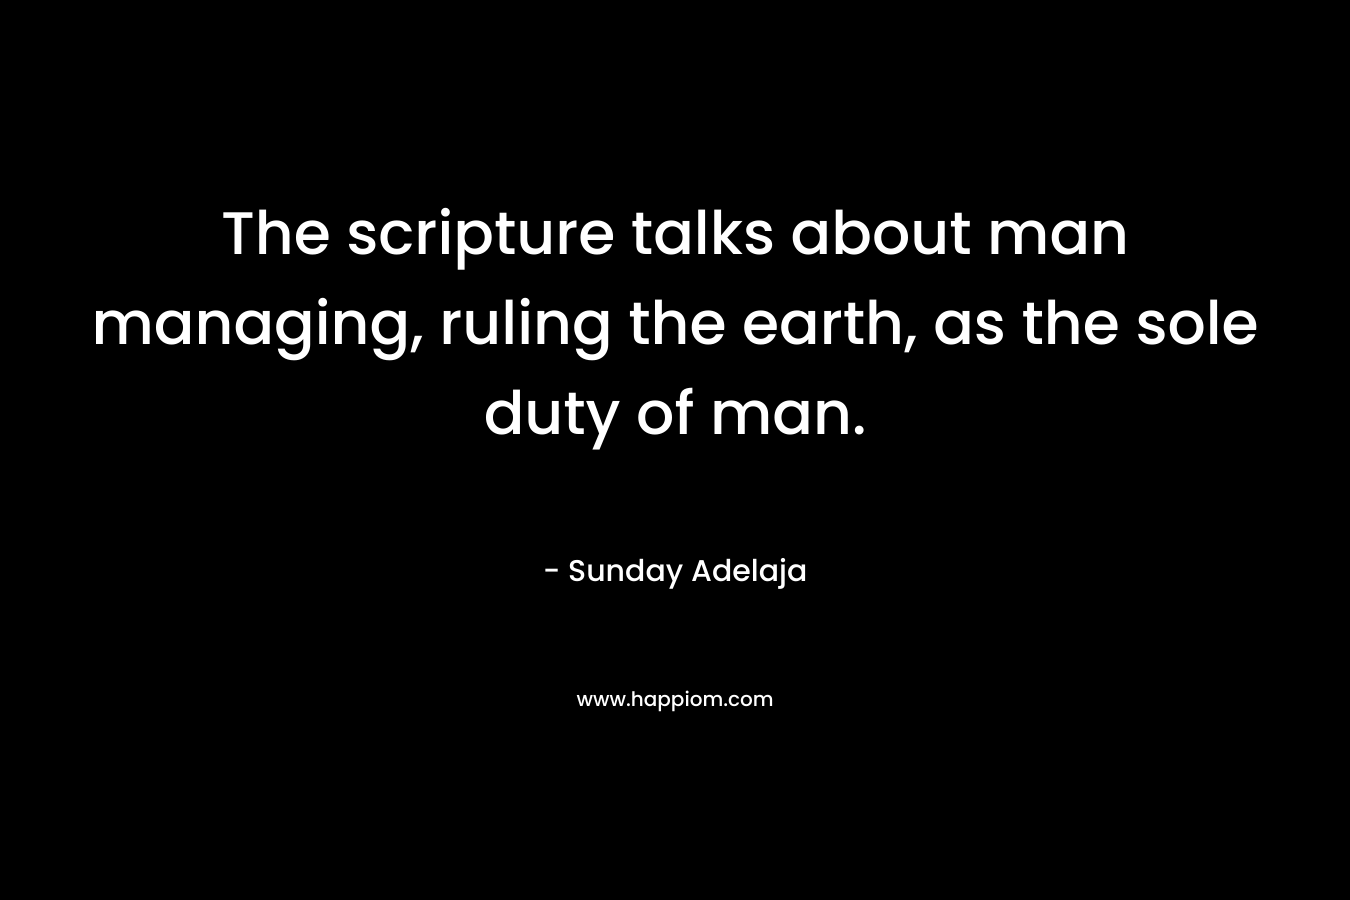 The scripture talks about man managing, ruling the earth, as the sole duty of man. – Sunday Adelaja